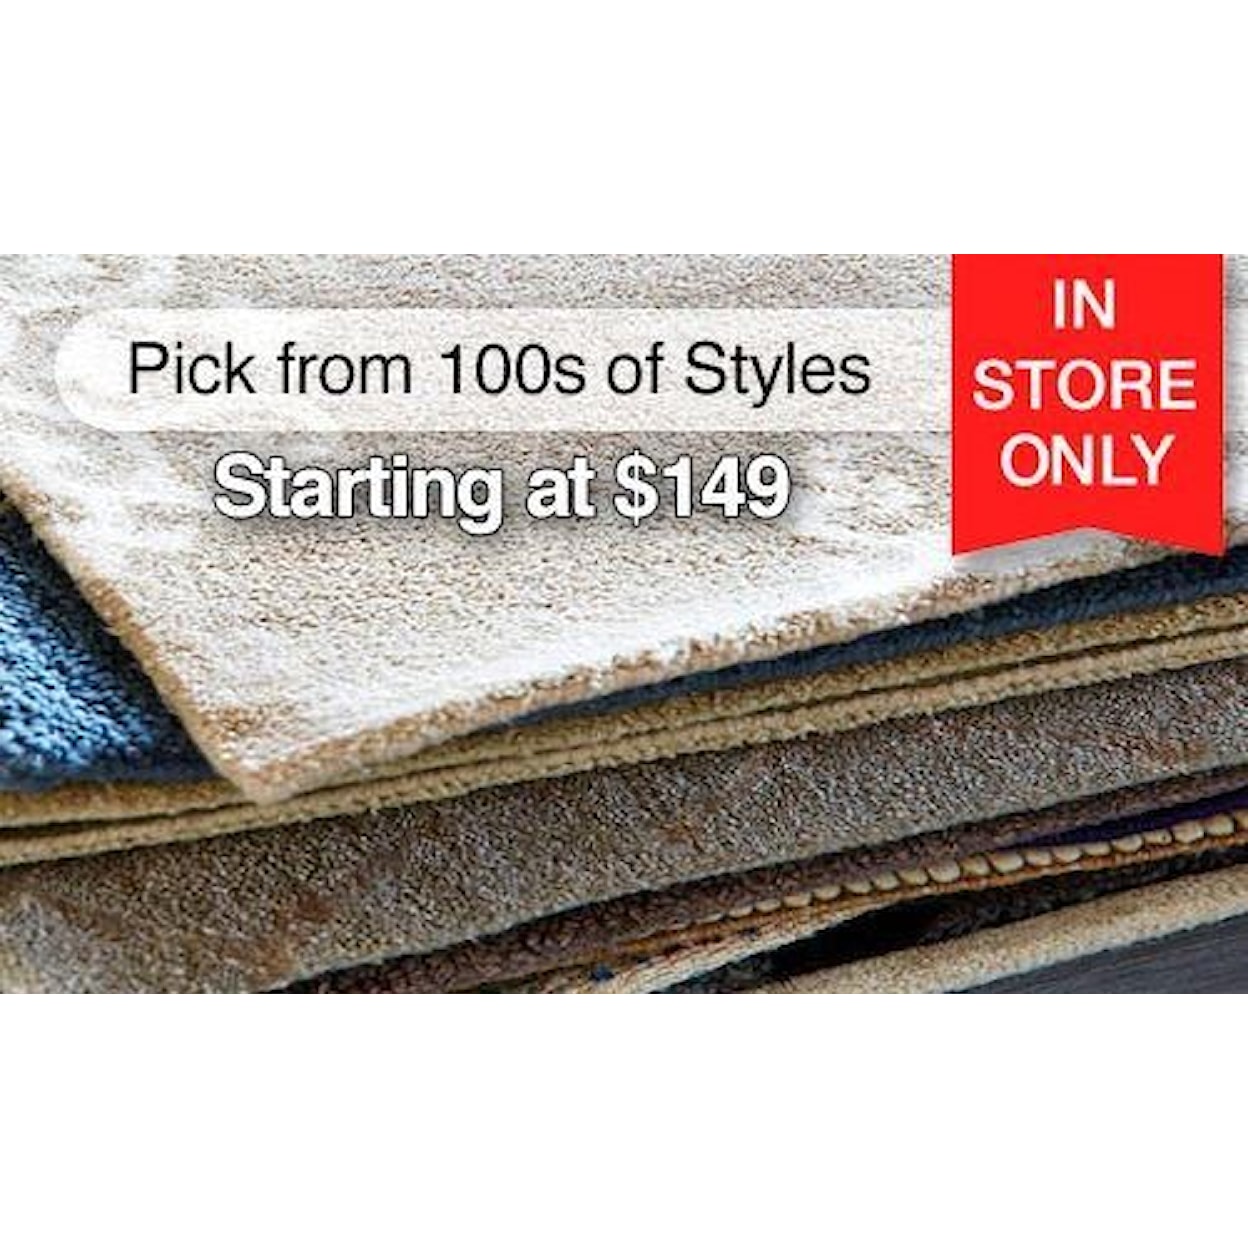 Exclusive Extreme Value Rugs 8 X 10 Extreme Value Rugs